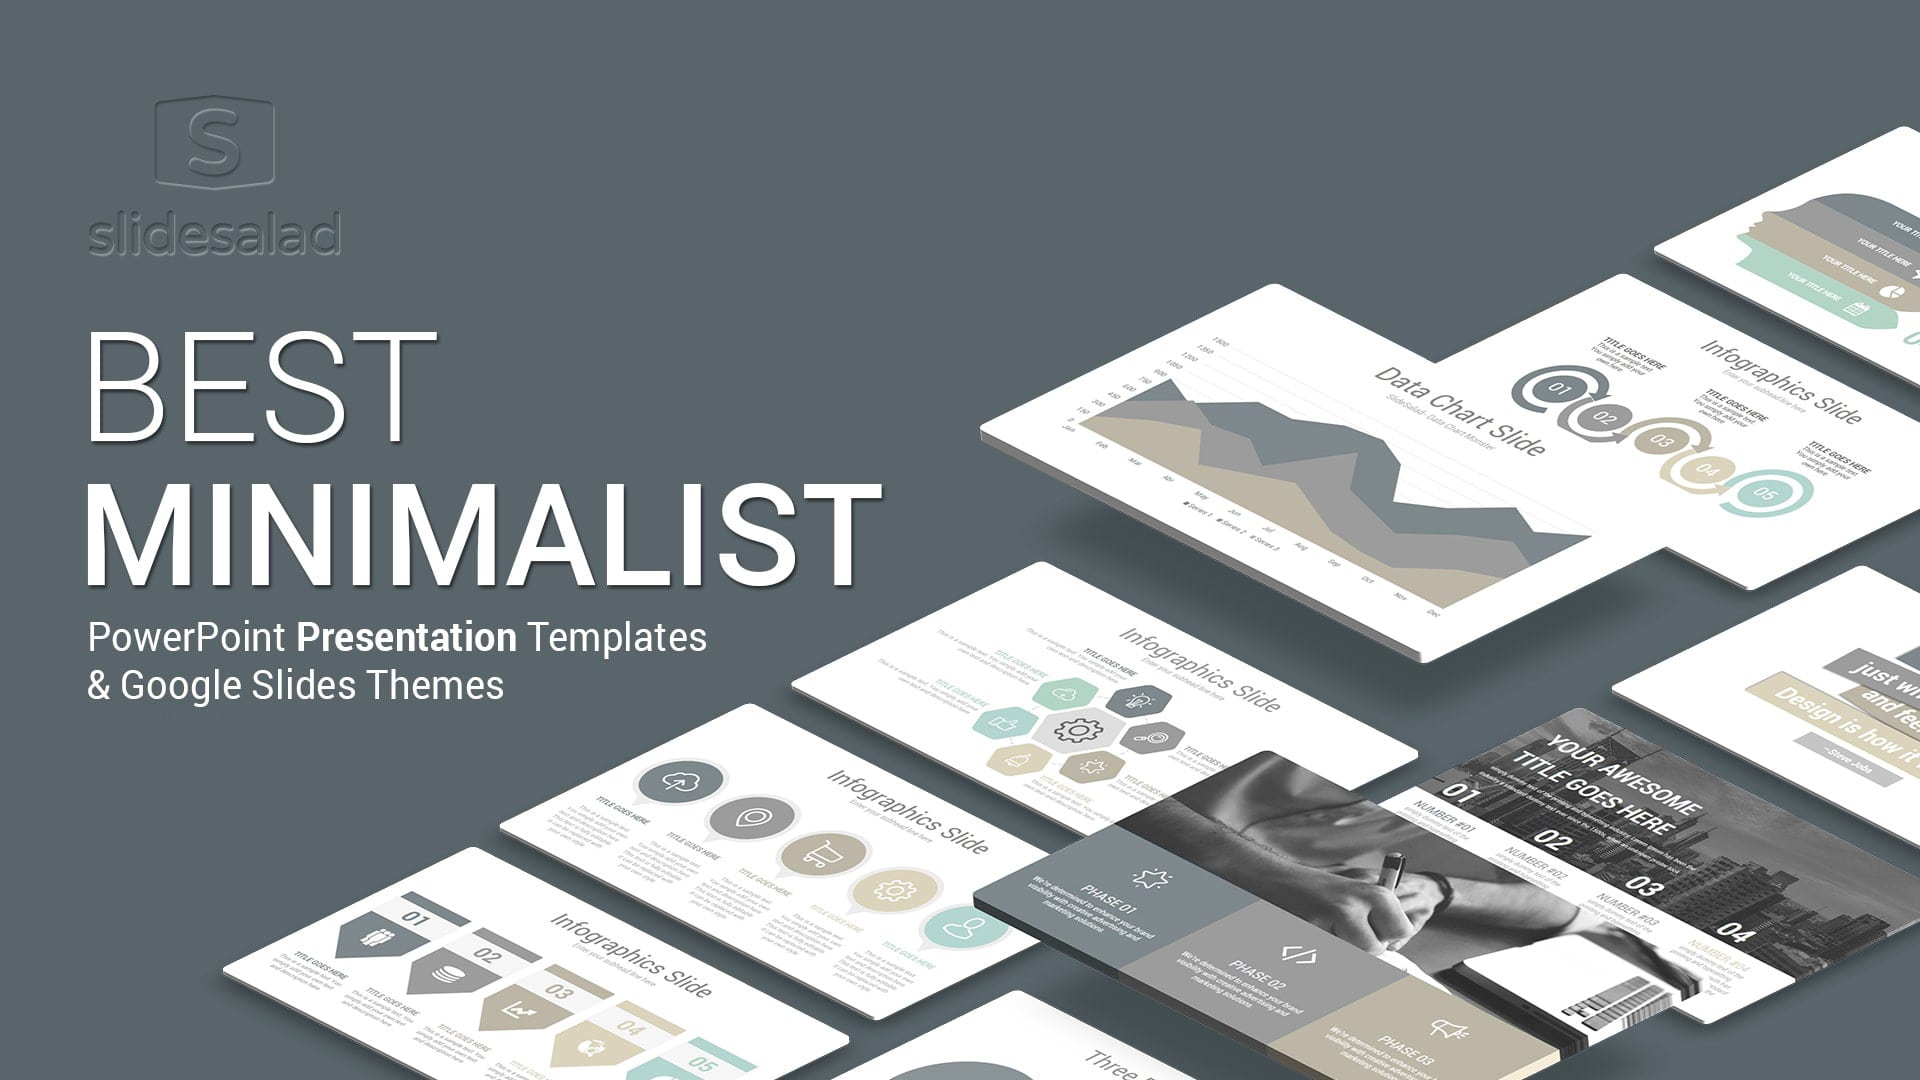 Best Minimalist PowerPoint Templates and Google Slides Themes - Great PowerPoint Templates